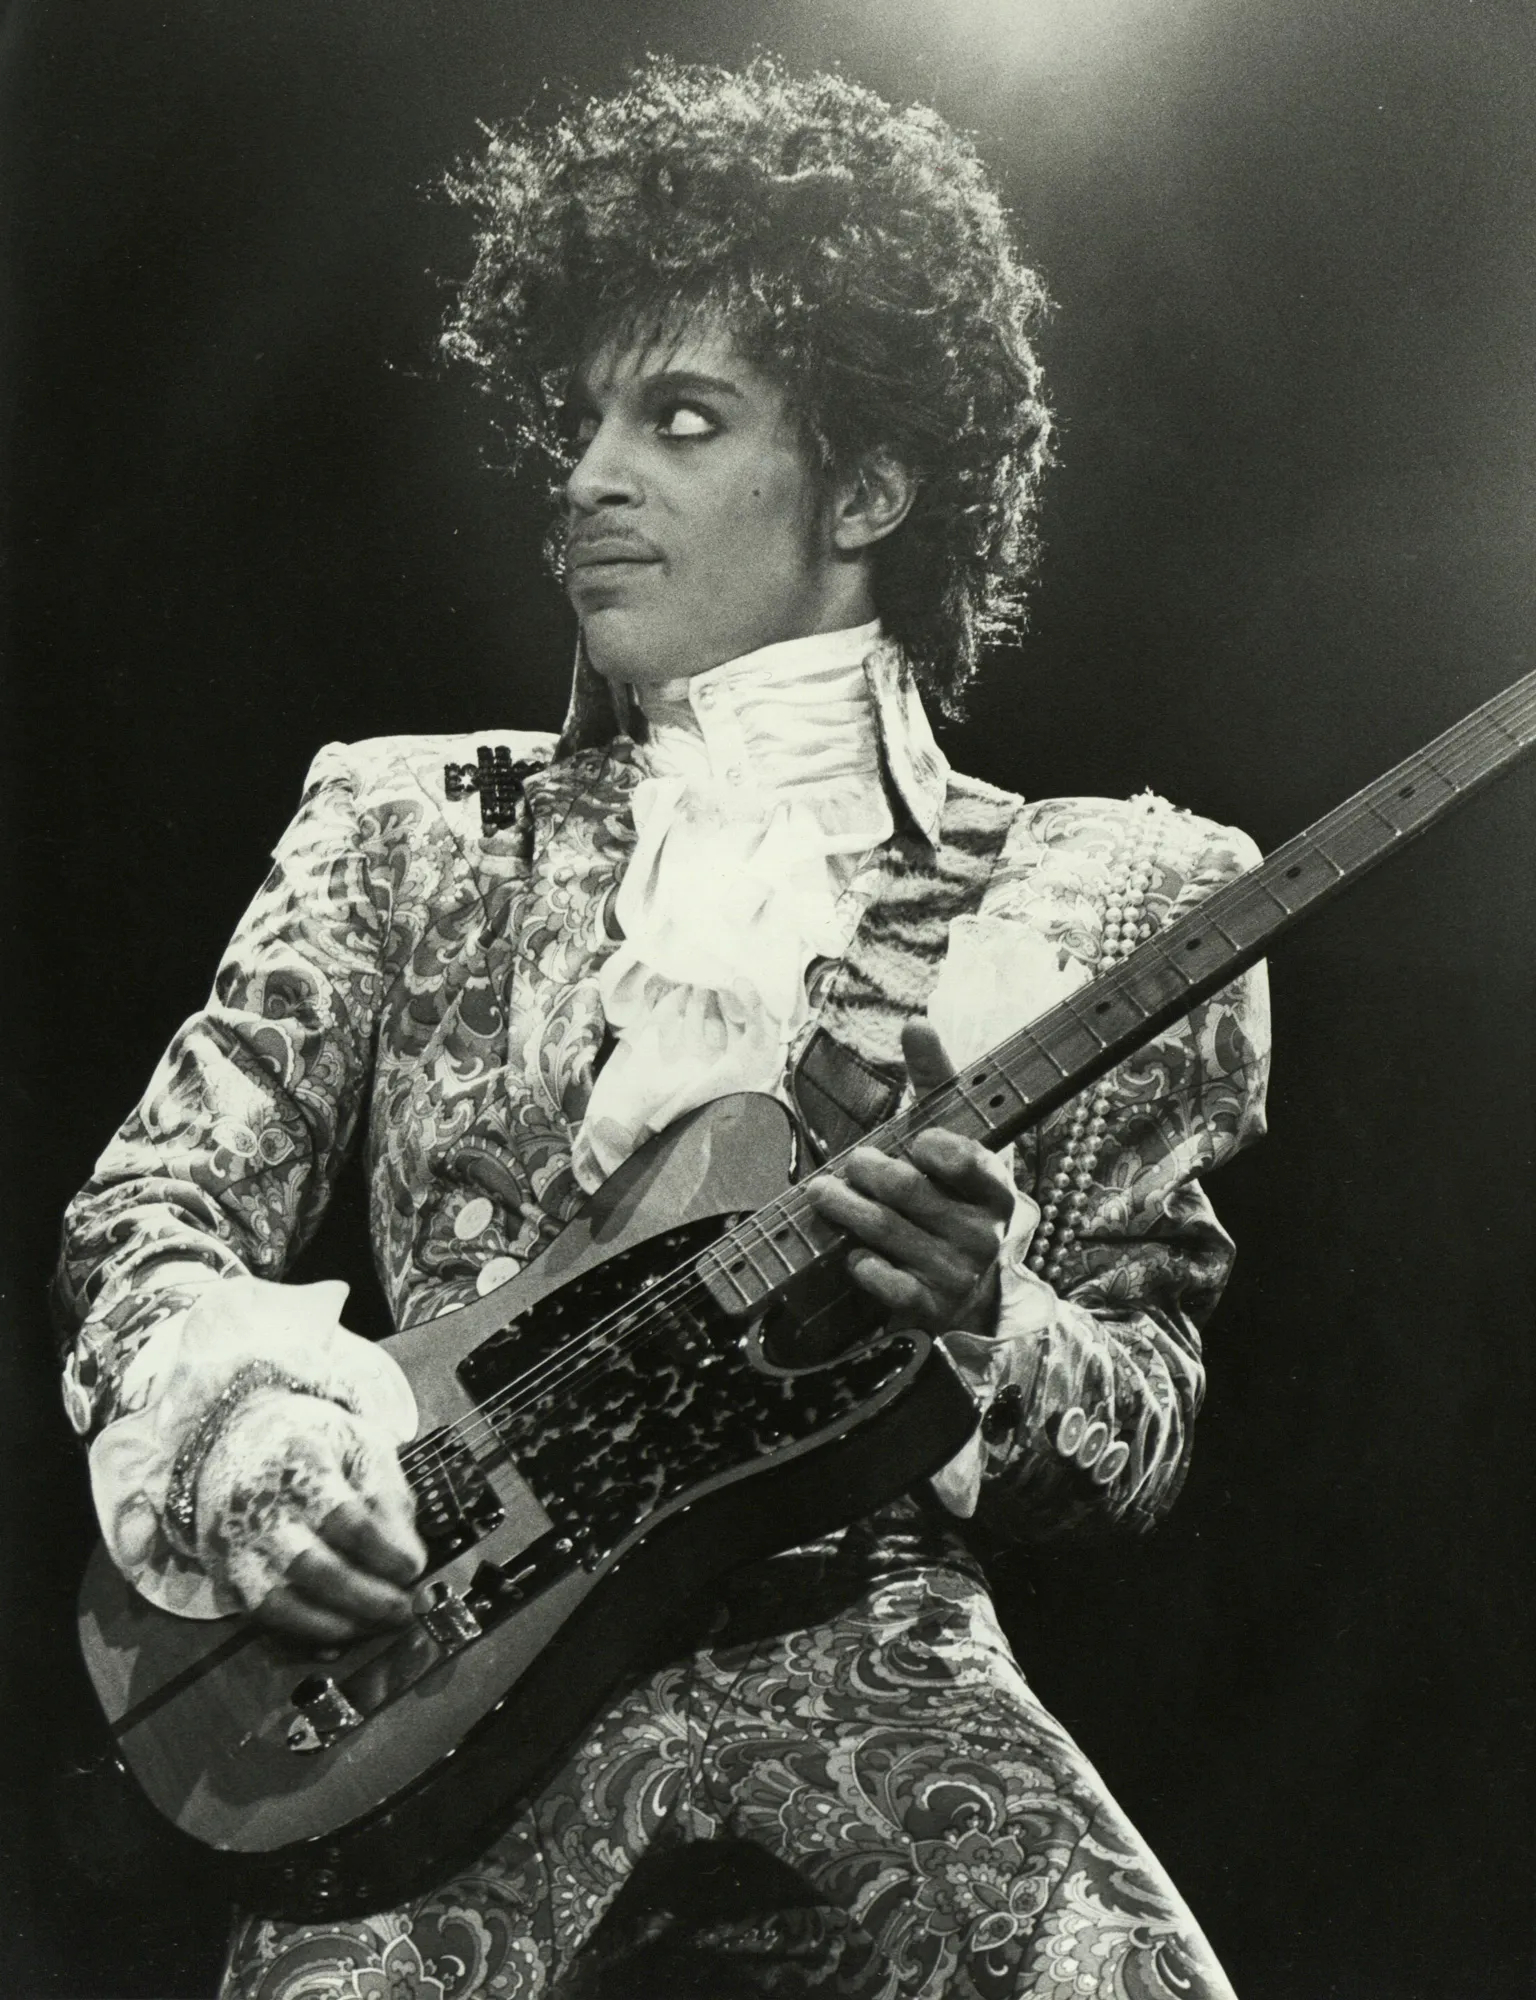 1536x2000 Prince's Memorabilia Is Going Up for Auction | Vogue